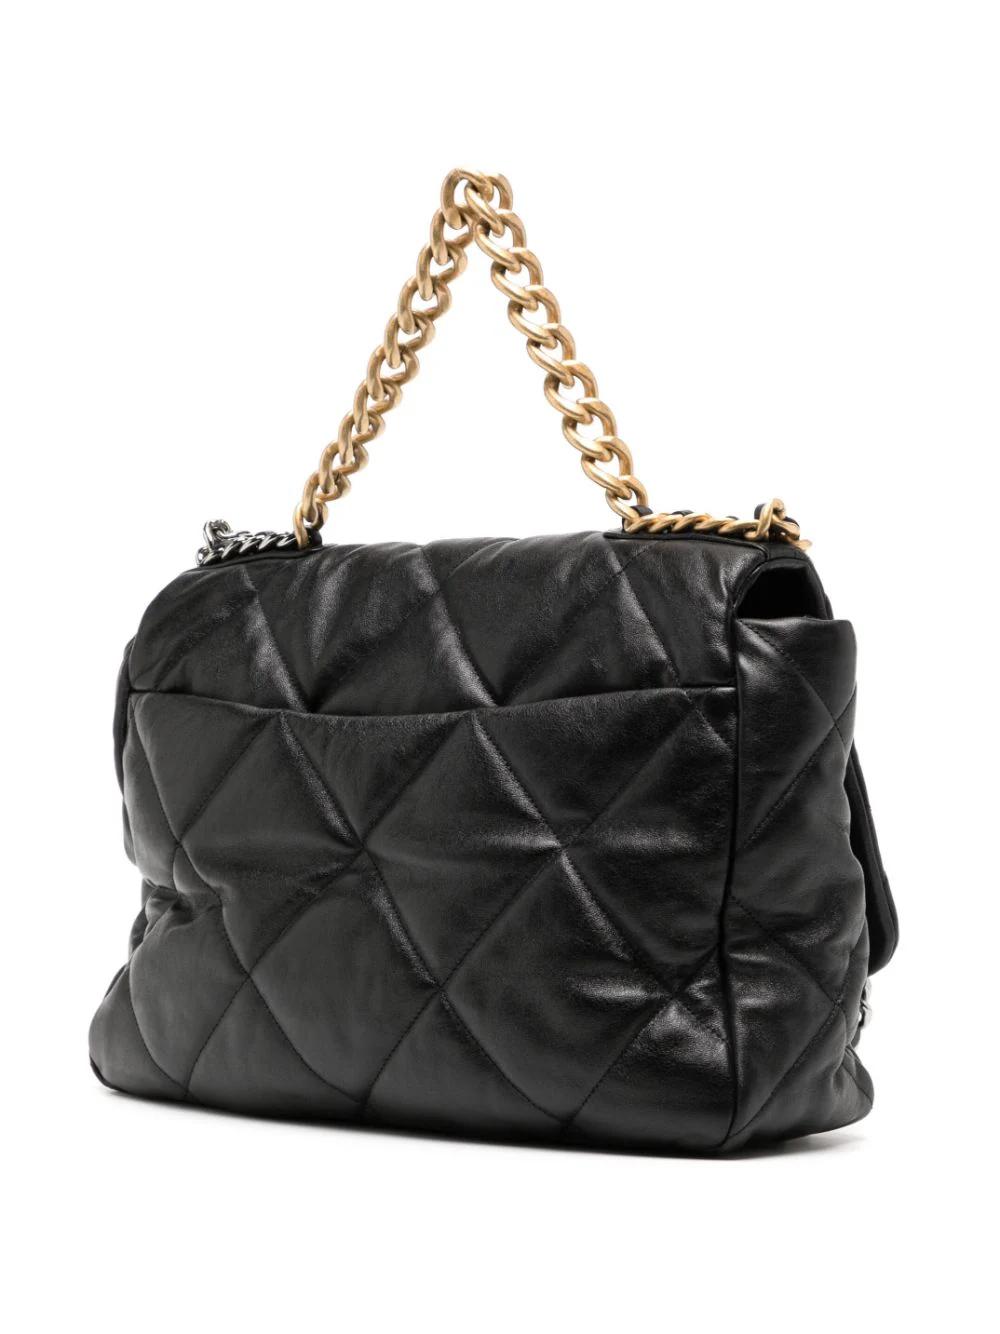 Chanel Maxi 19 Flap bag made of black calf leather. Featuring diamond quilting and a padded design. Signature interlocking CC turn-lock fastening and fold over top. Two chain-link shoulder straps with gold & silver-tone hardware. This bag was